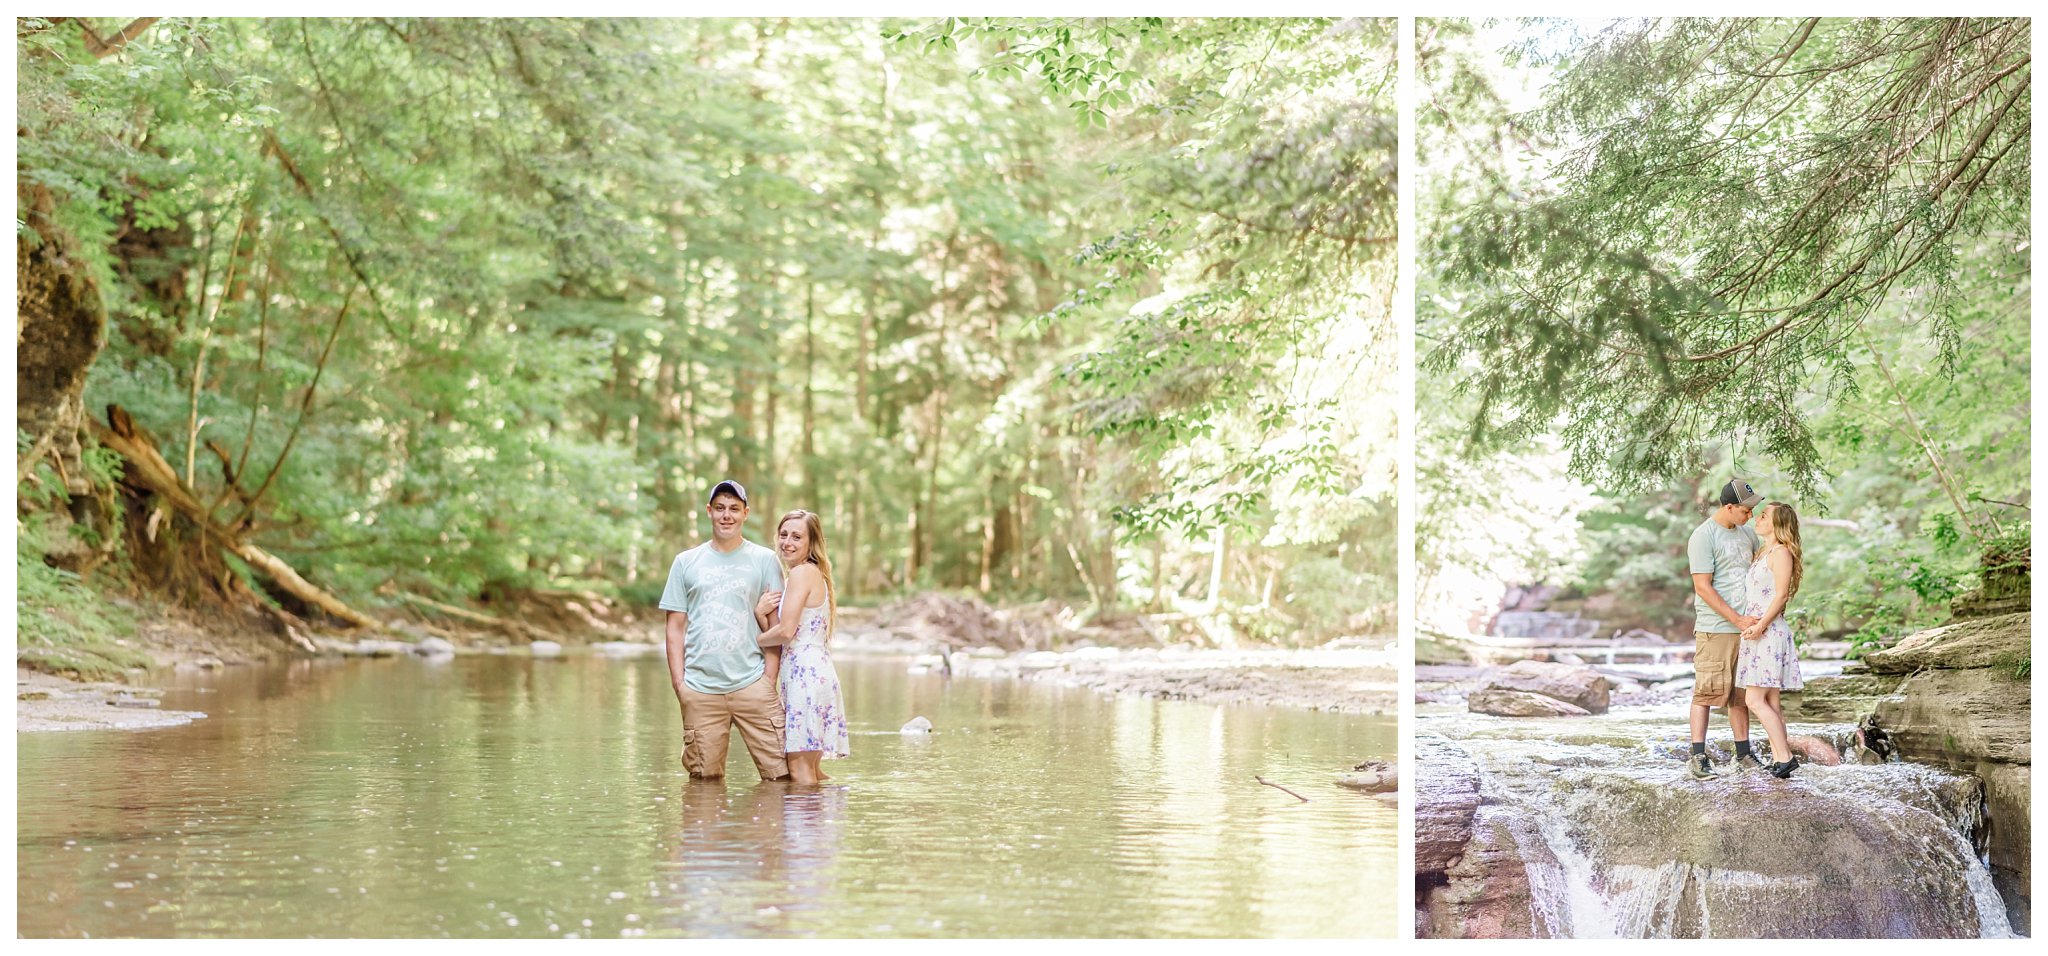 Joanna Young Photography Elizabeth and Cody Engagement Session_0014.jpg